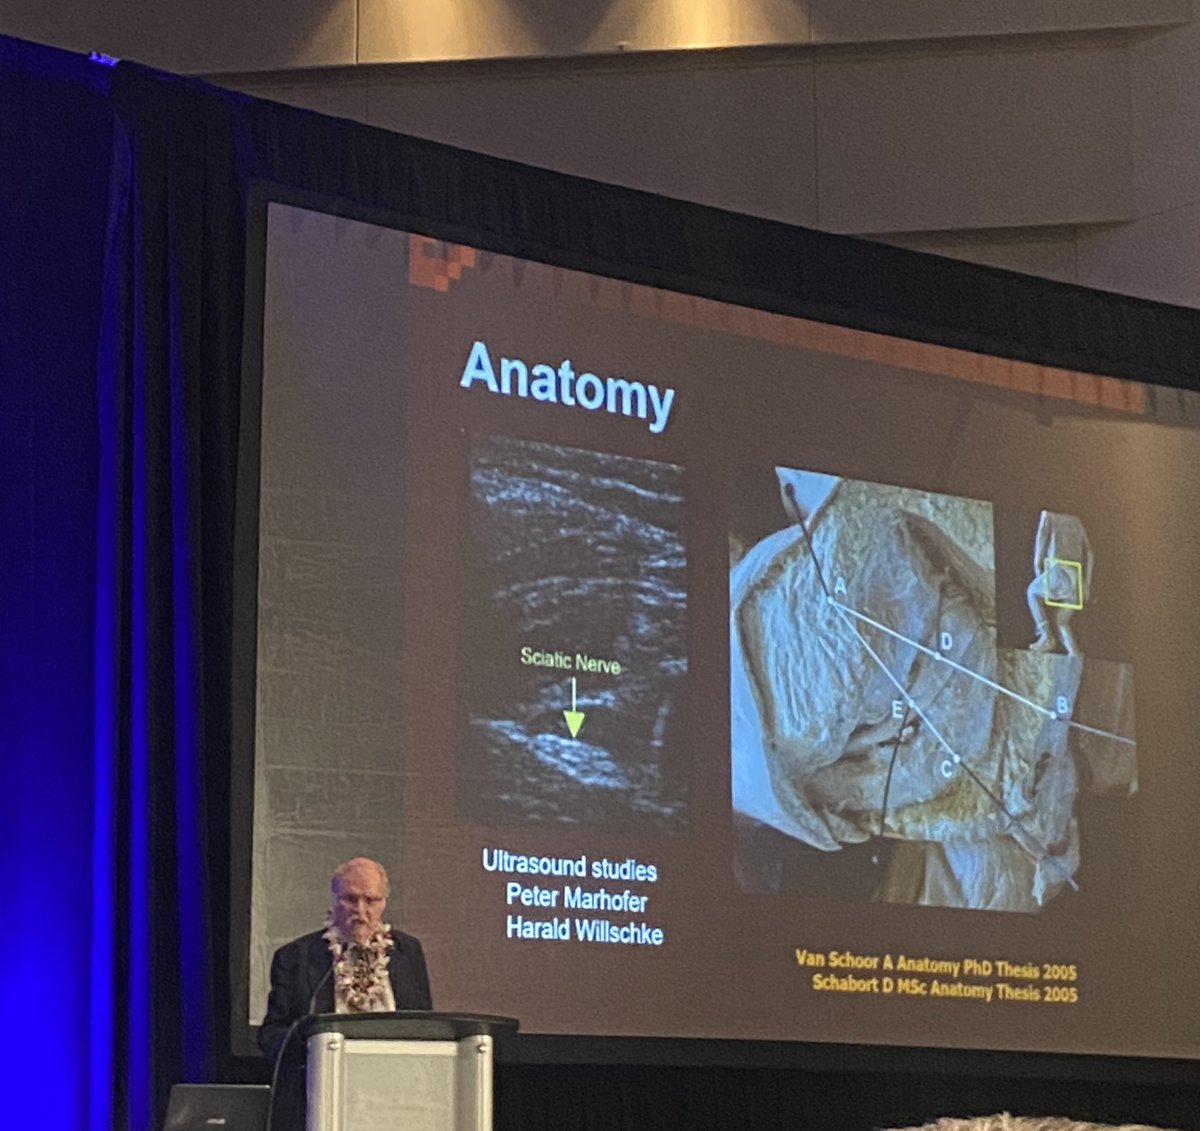 Dr. Bosenberg: A true ‘icon’ in #pedsregional and #anatomy in #pedsanes. A pioneer in our field- he has brought us to our present day success and paved the way for future expansion of pediatric regional anesthesia #SPANOLA22 @PediAnesthesia 👏👏